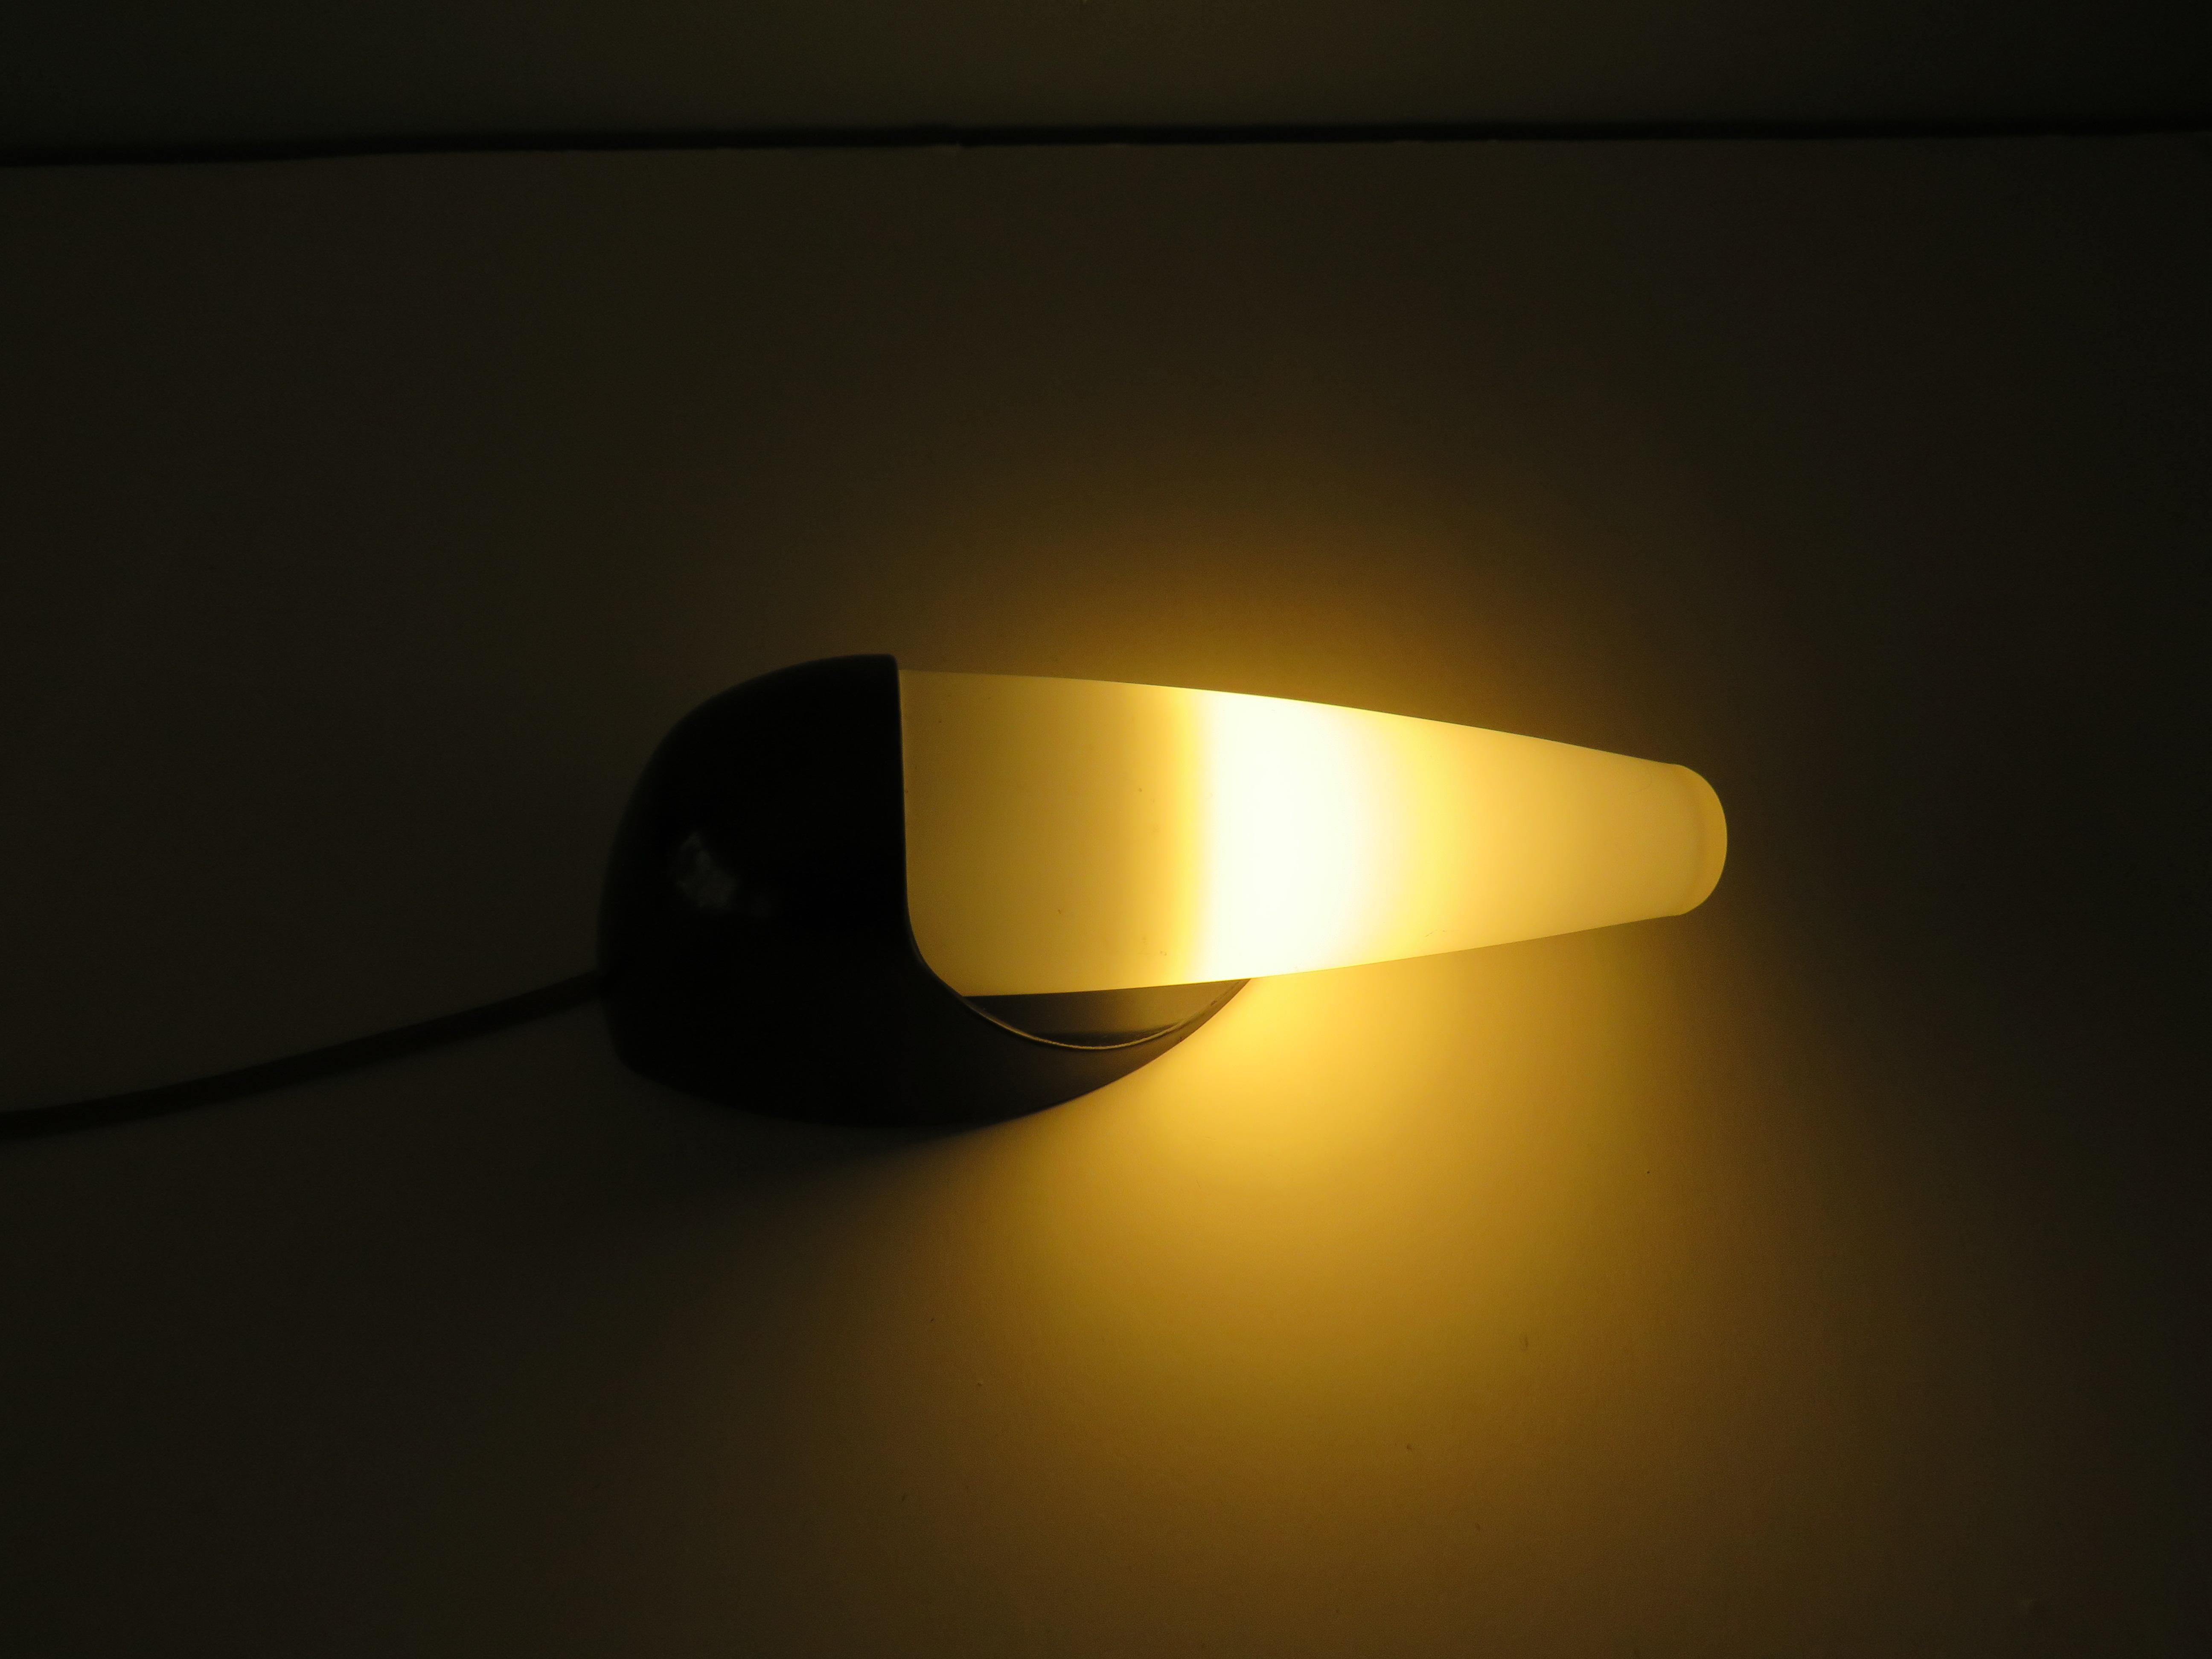 Mid-Century Modern minimalist conical wall lamp made of matt opaline glass and with a black Bakelite frame.
The lamp has a black bakelite E 14 fitting and is in good and working condition. An on and off cord and mechanism is present (unfortunately